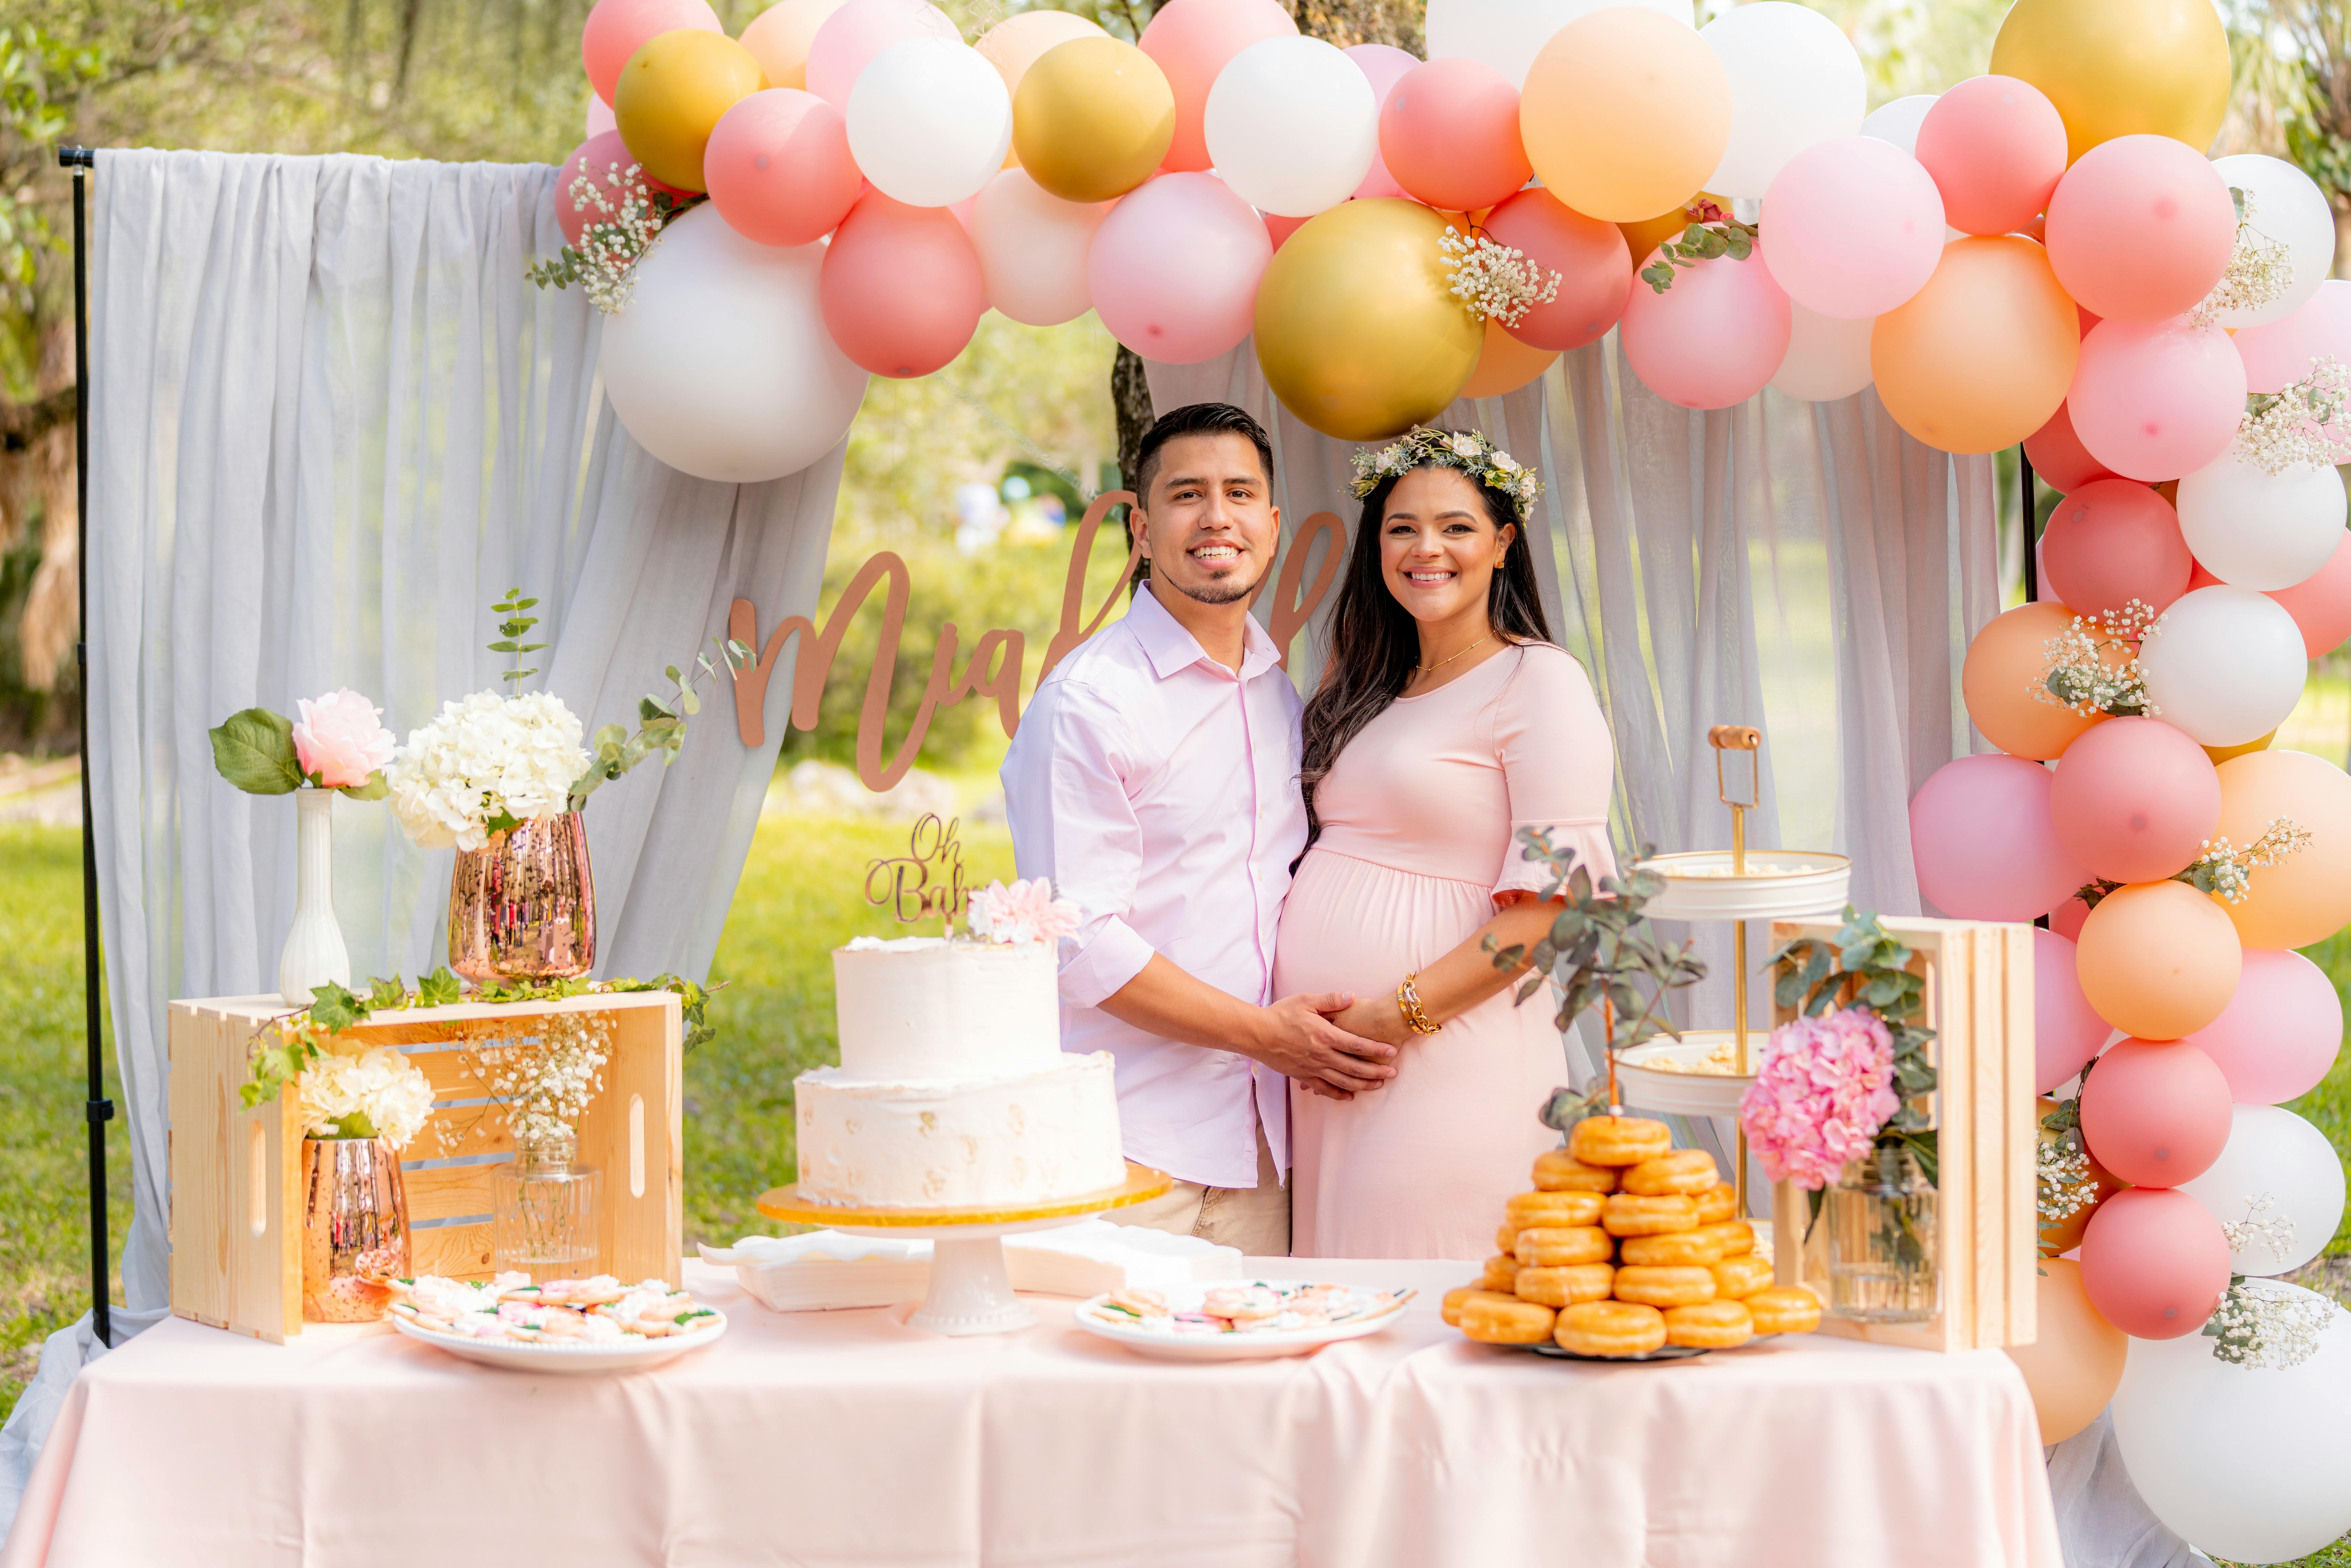 Label Prajakta Kodre - Baby Shower Twining Outfit for @tanvi_khot_patil and  @suraj.patil .... These happy parents to be, have our heart 💓 . .  #parenthood #parentstobe #babyshower #newphase #welcome #baby #mothertobe  #fathertobe #